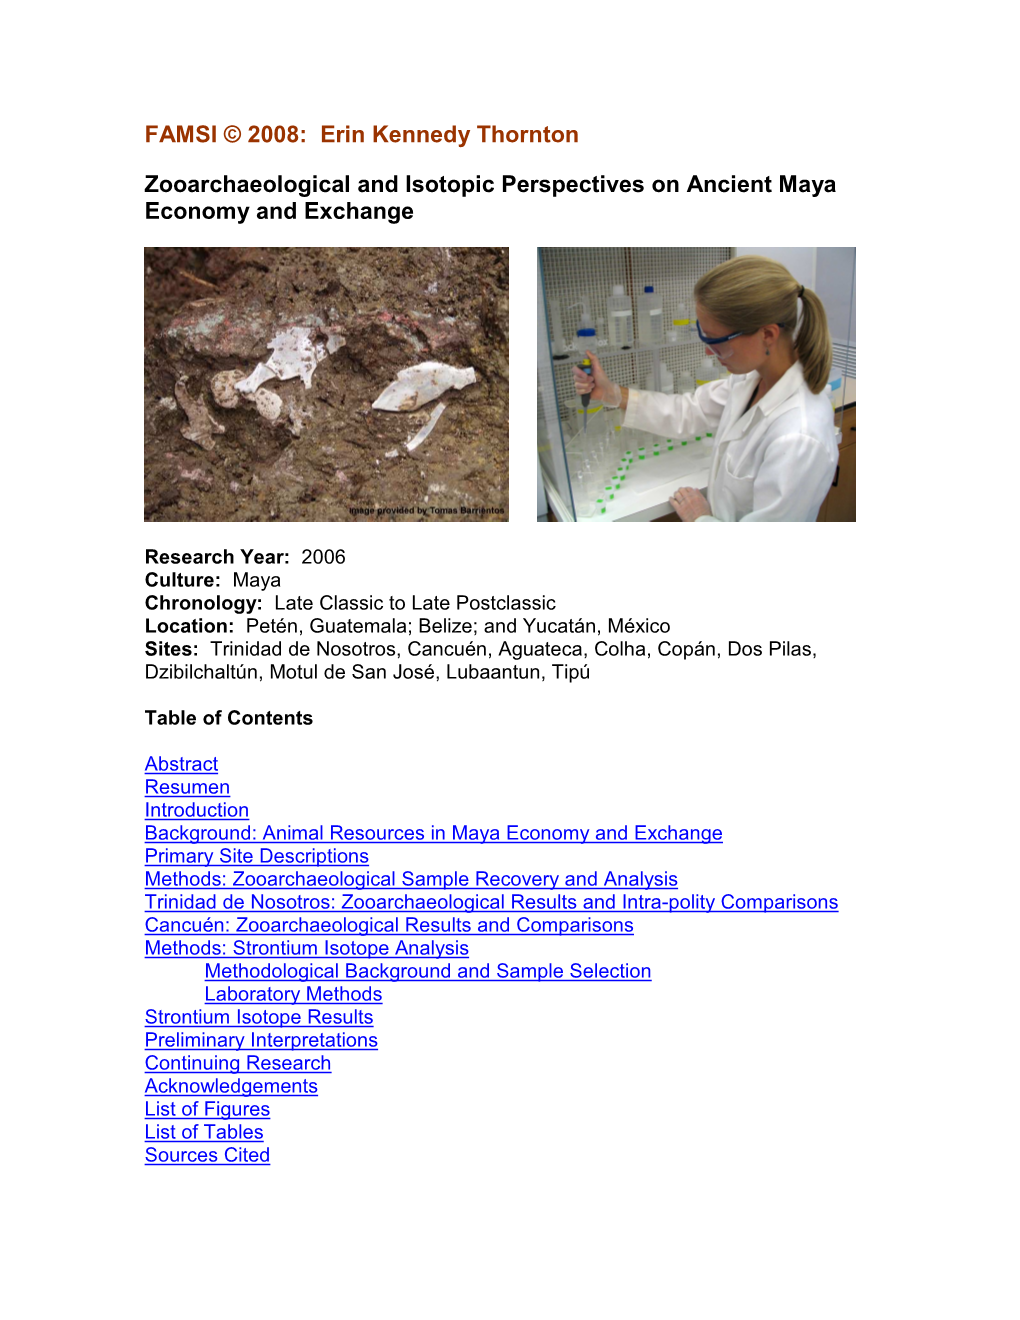 Zooarchaeological and Isotopic Perspectives on Ancient Maya Economy and Exchange